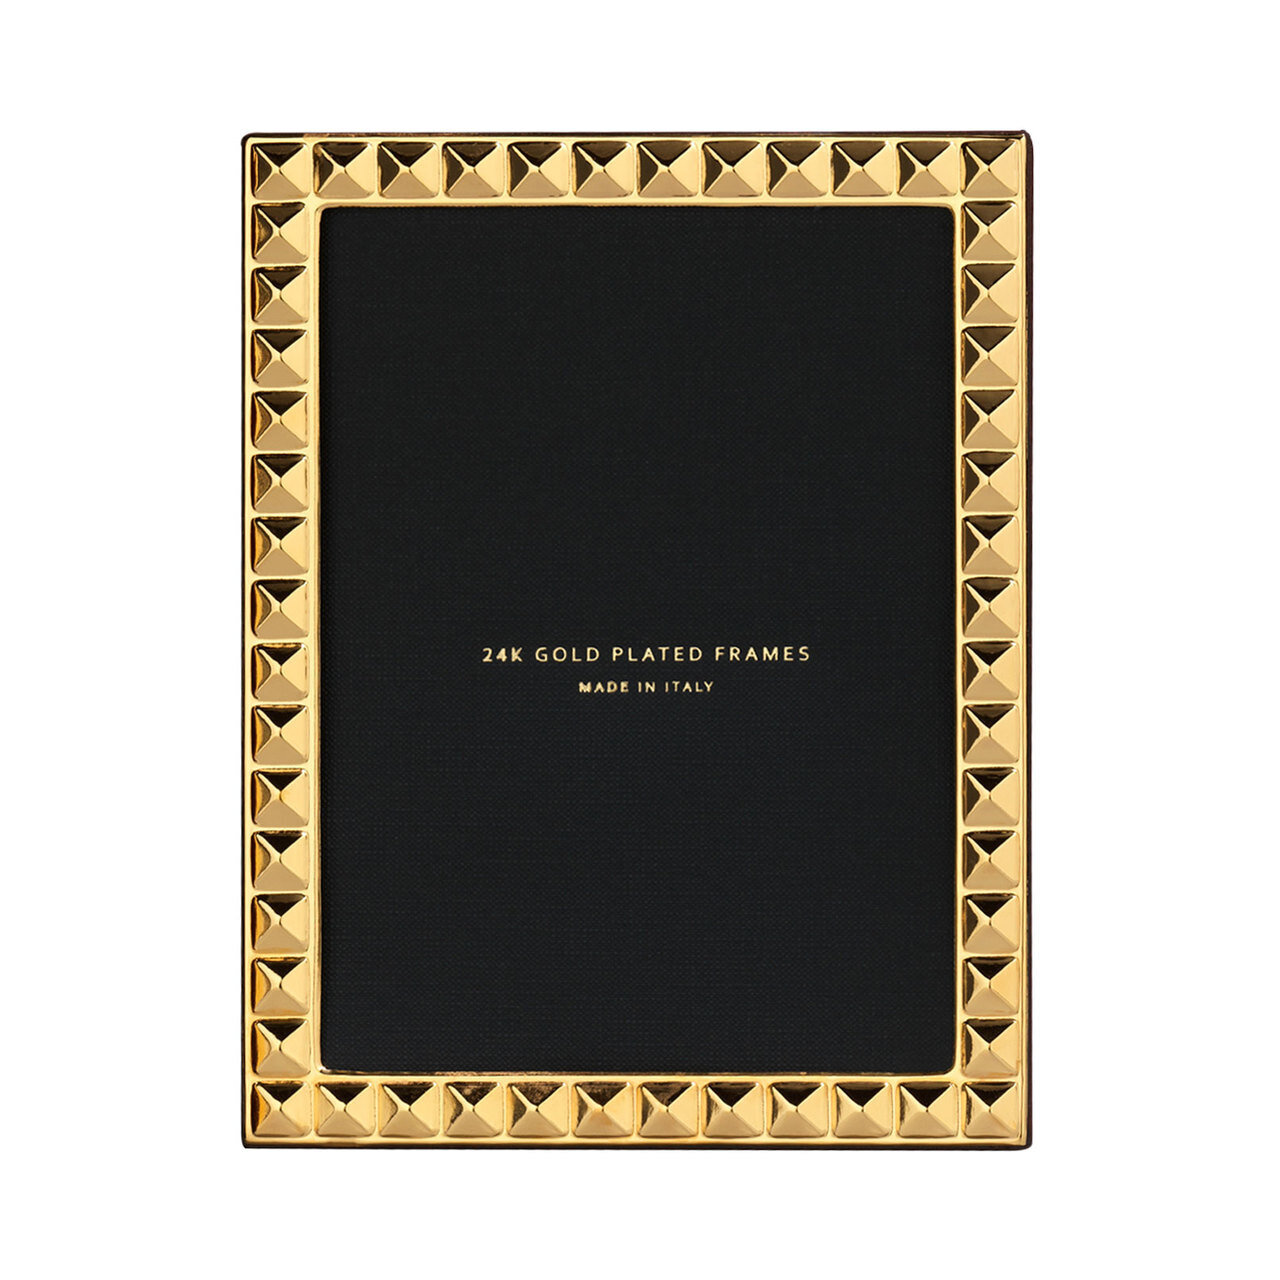 Cunill Diamonds 5 x 7 Inch Picture Frame - 24k Gold Plated 0.5 Microns